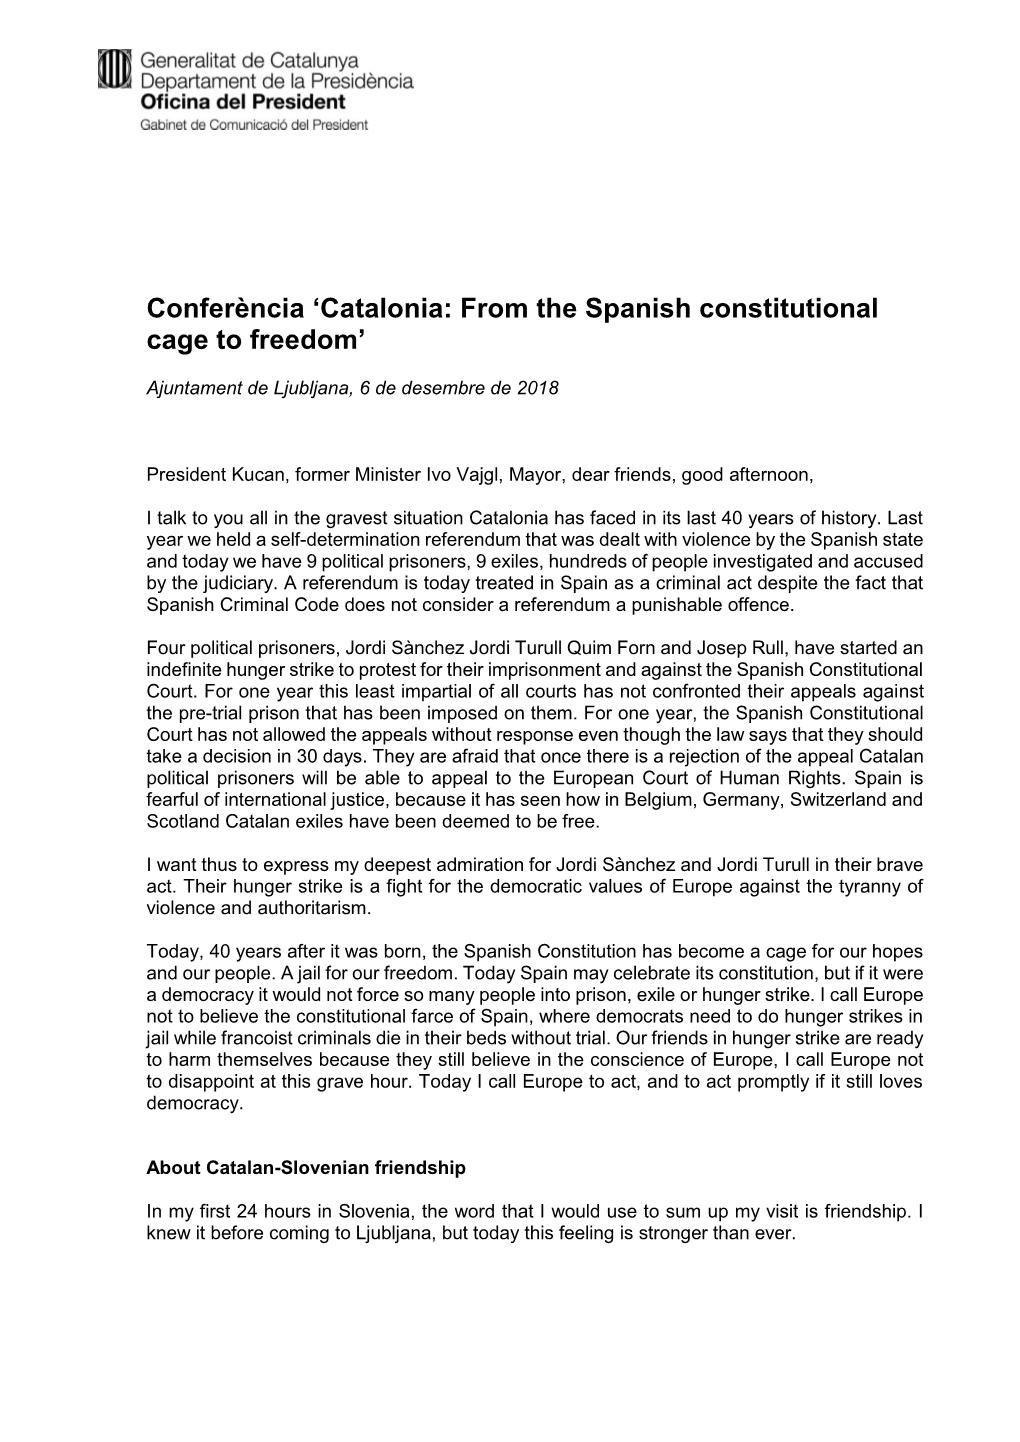 Catalonia: from the Spanish Constitutional Cage to Freedom’